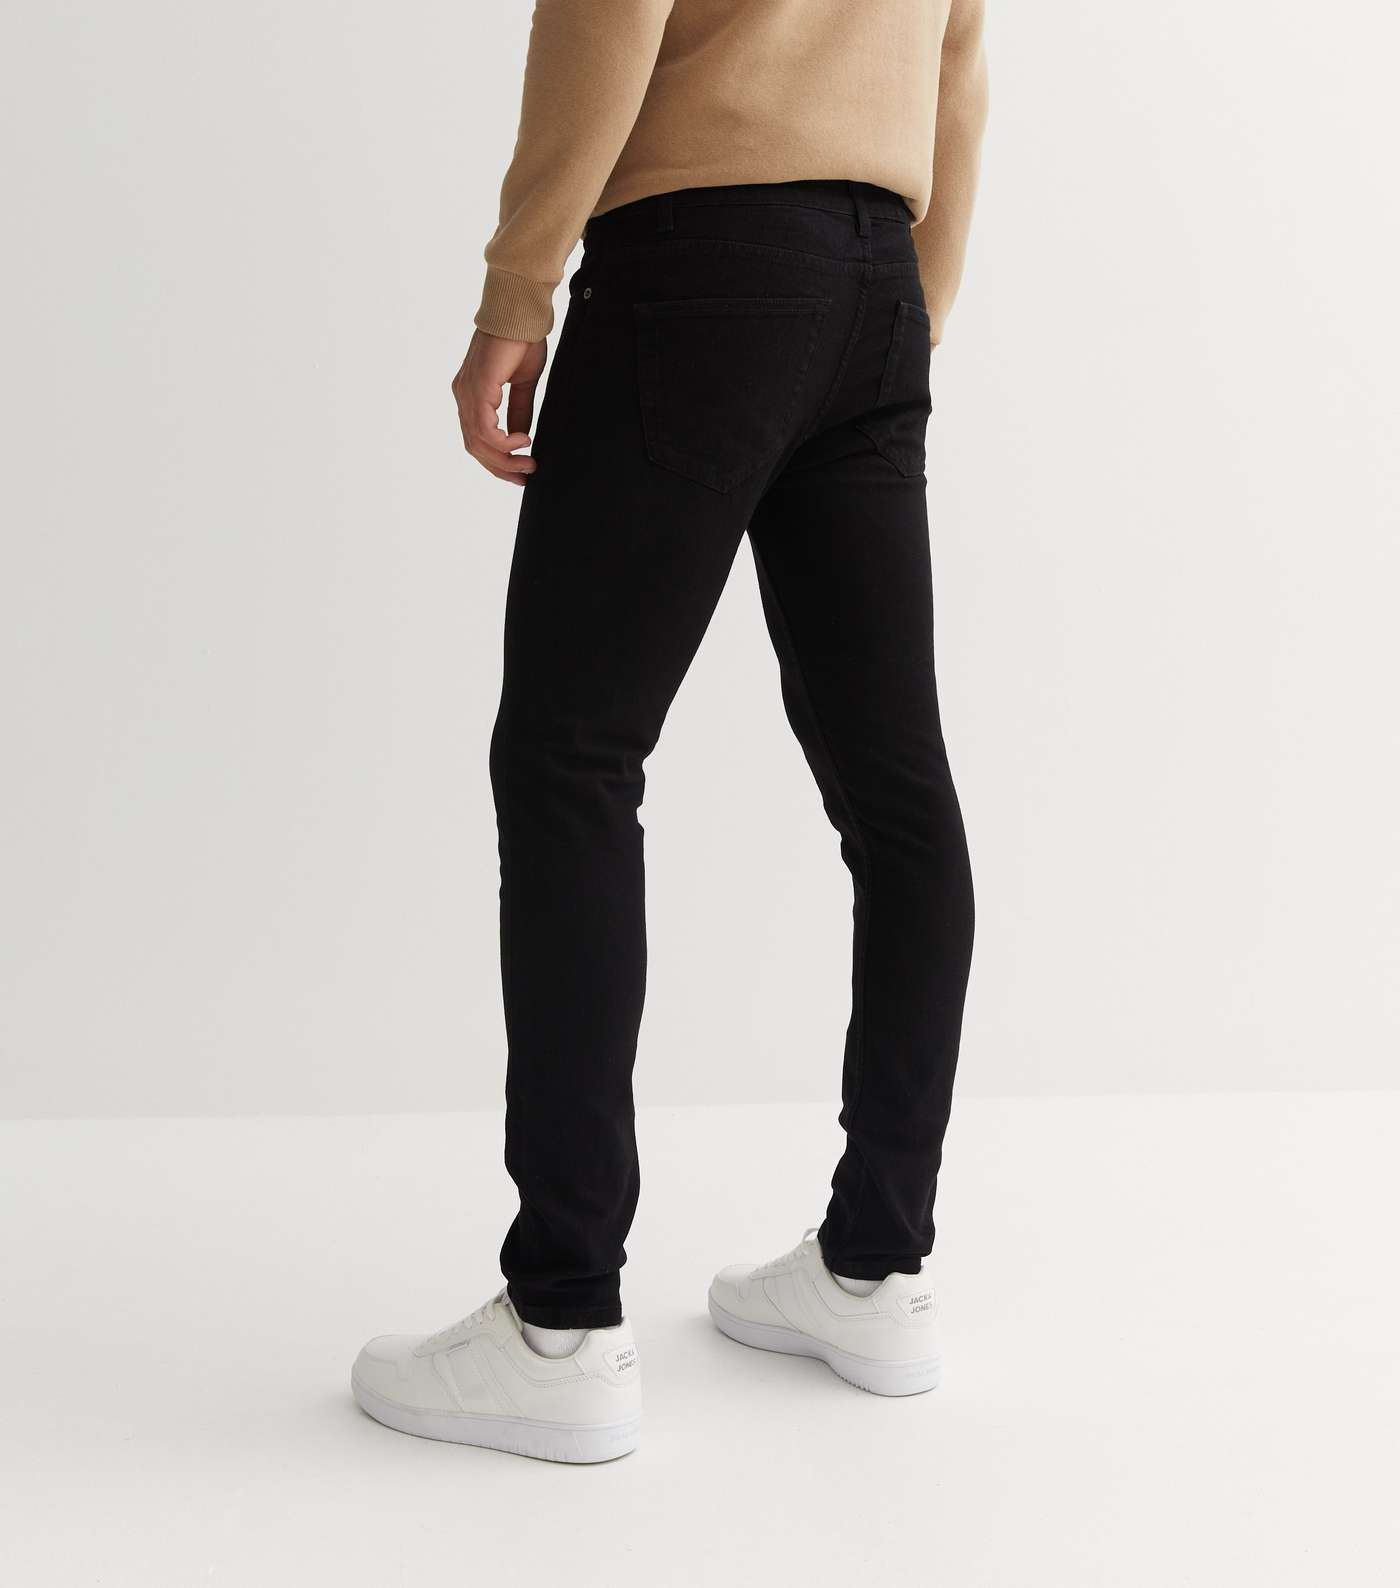 Only & Sons Black Skinny Jeans Image 4